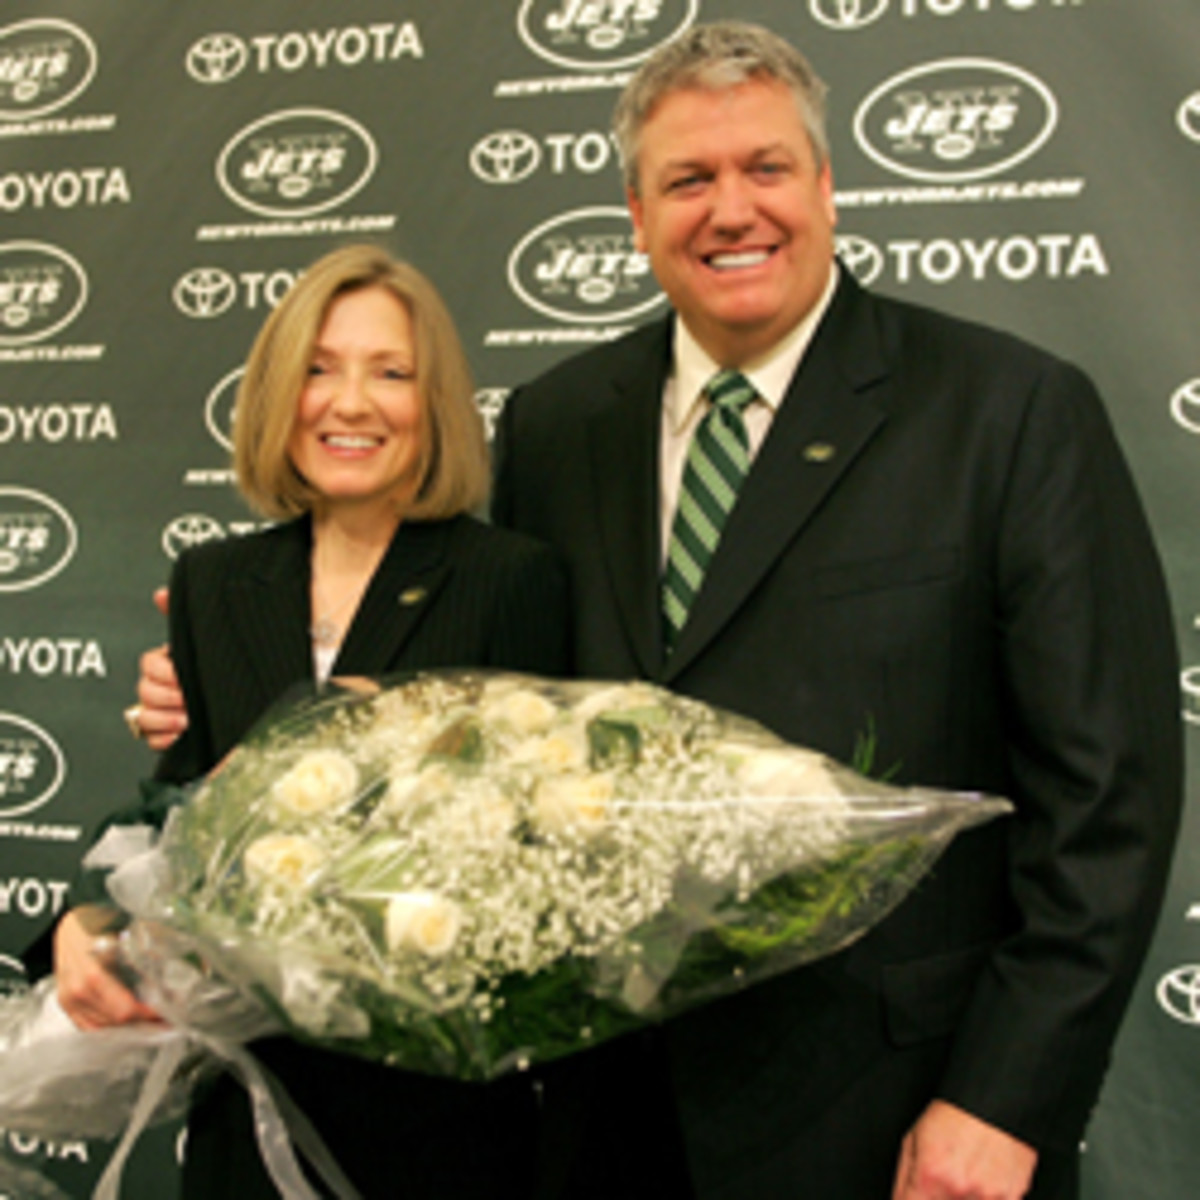 Rex Ryan and his wife, Michelle, have made headlines since his hire as Jets coach. (Andy Marlin/Getty Images)